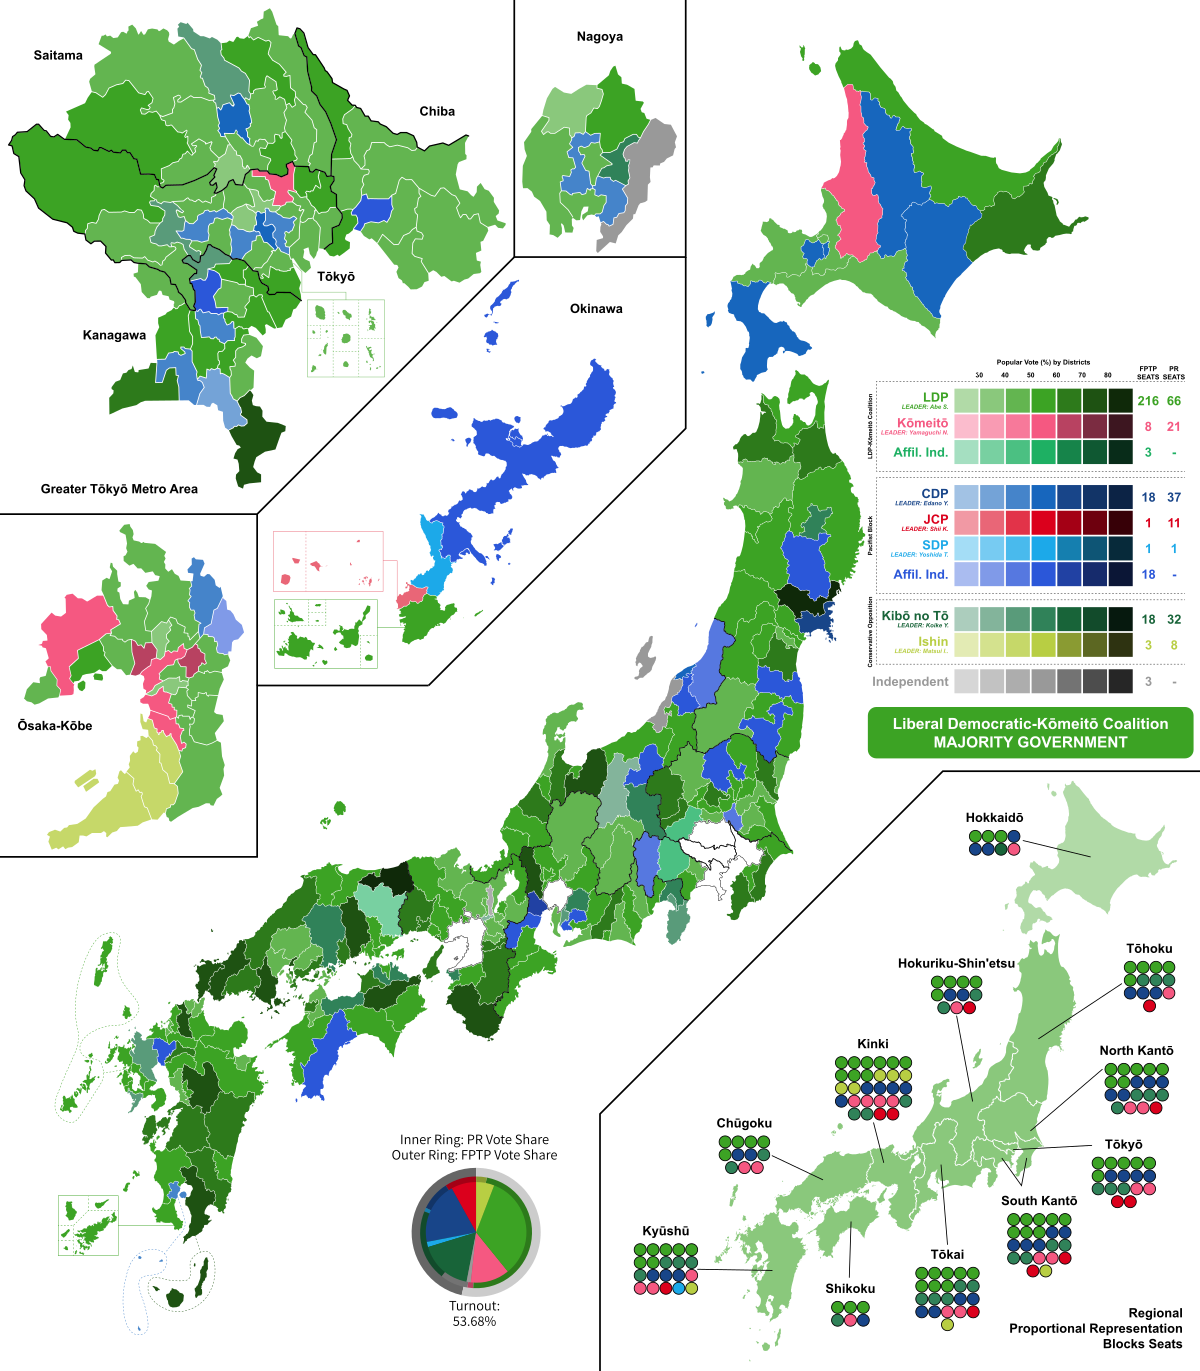 2017 Japanese general election